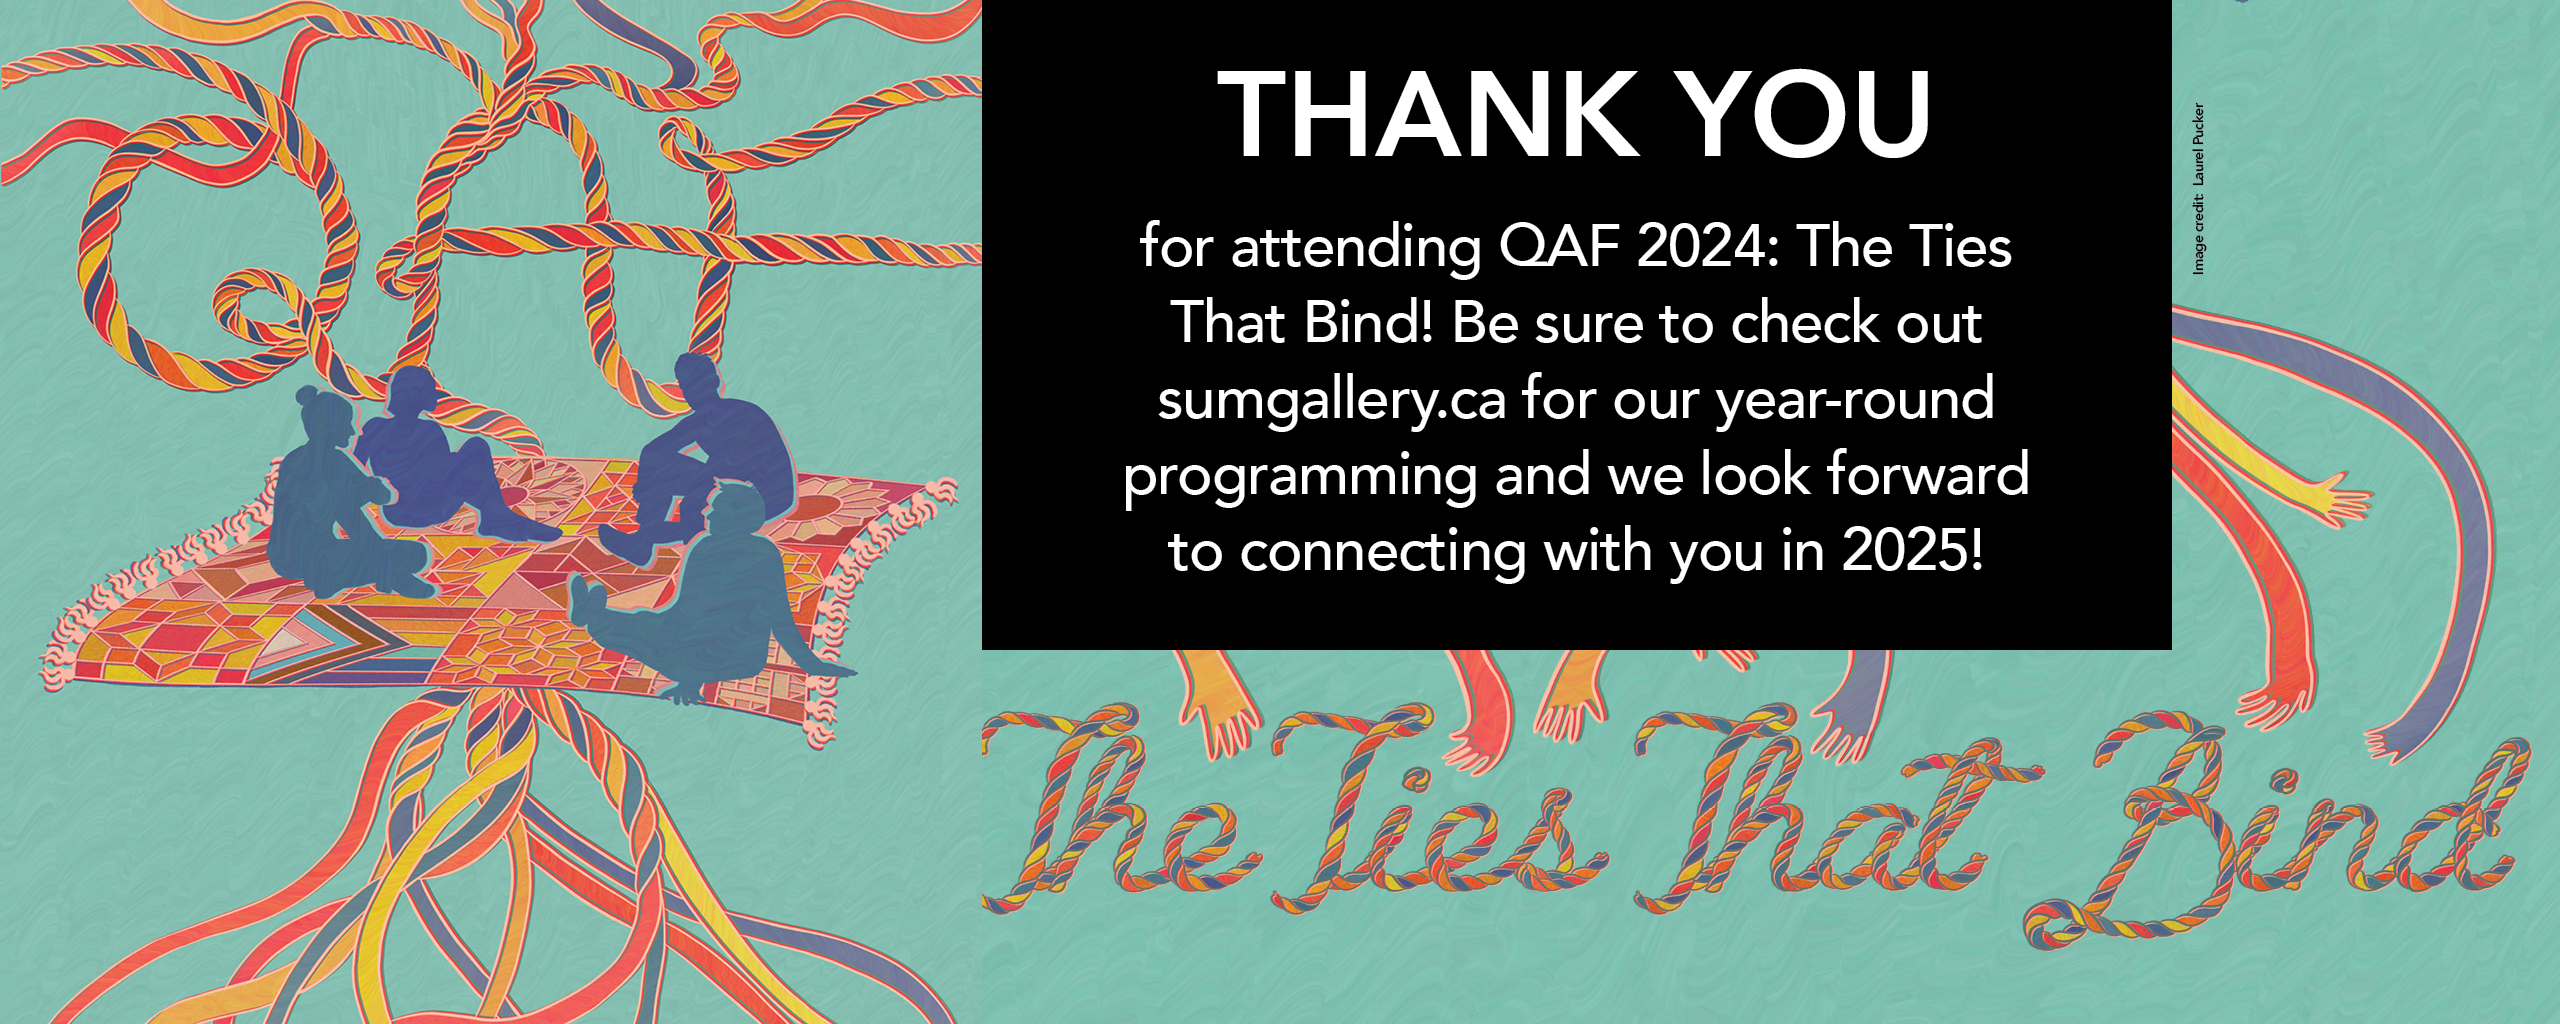 Thank you for attending QAF 2024